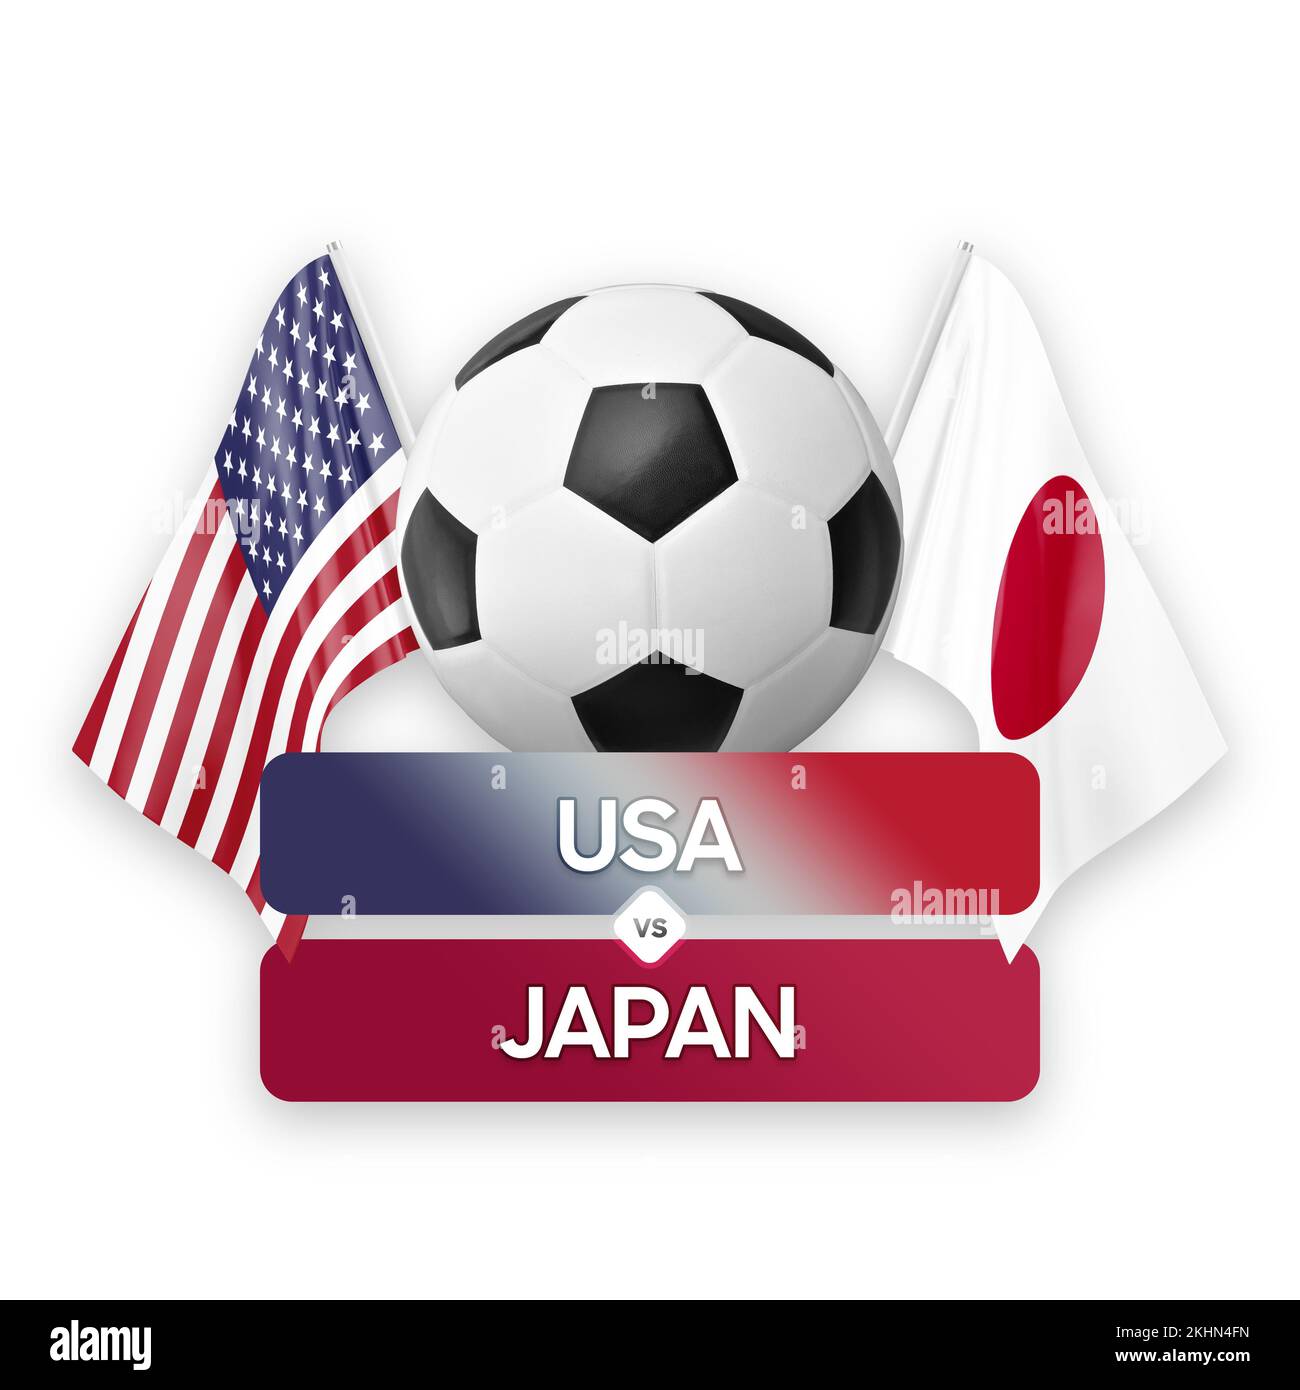 USA vs Japan national teams soccer football match competition concept